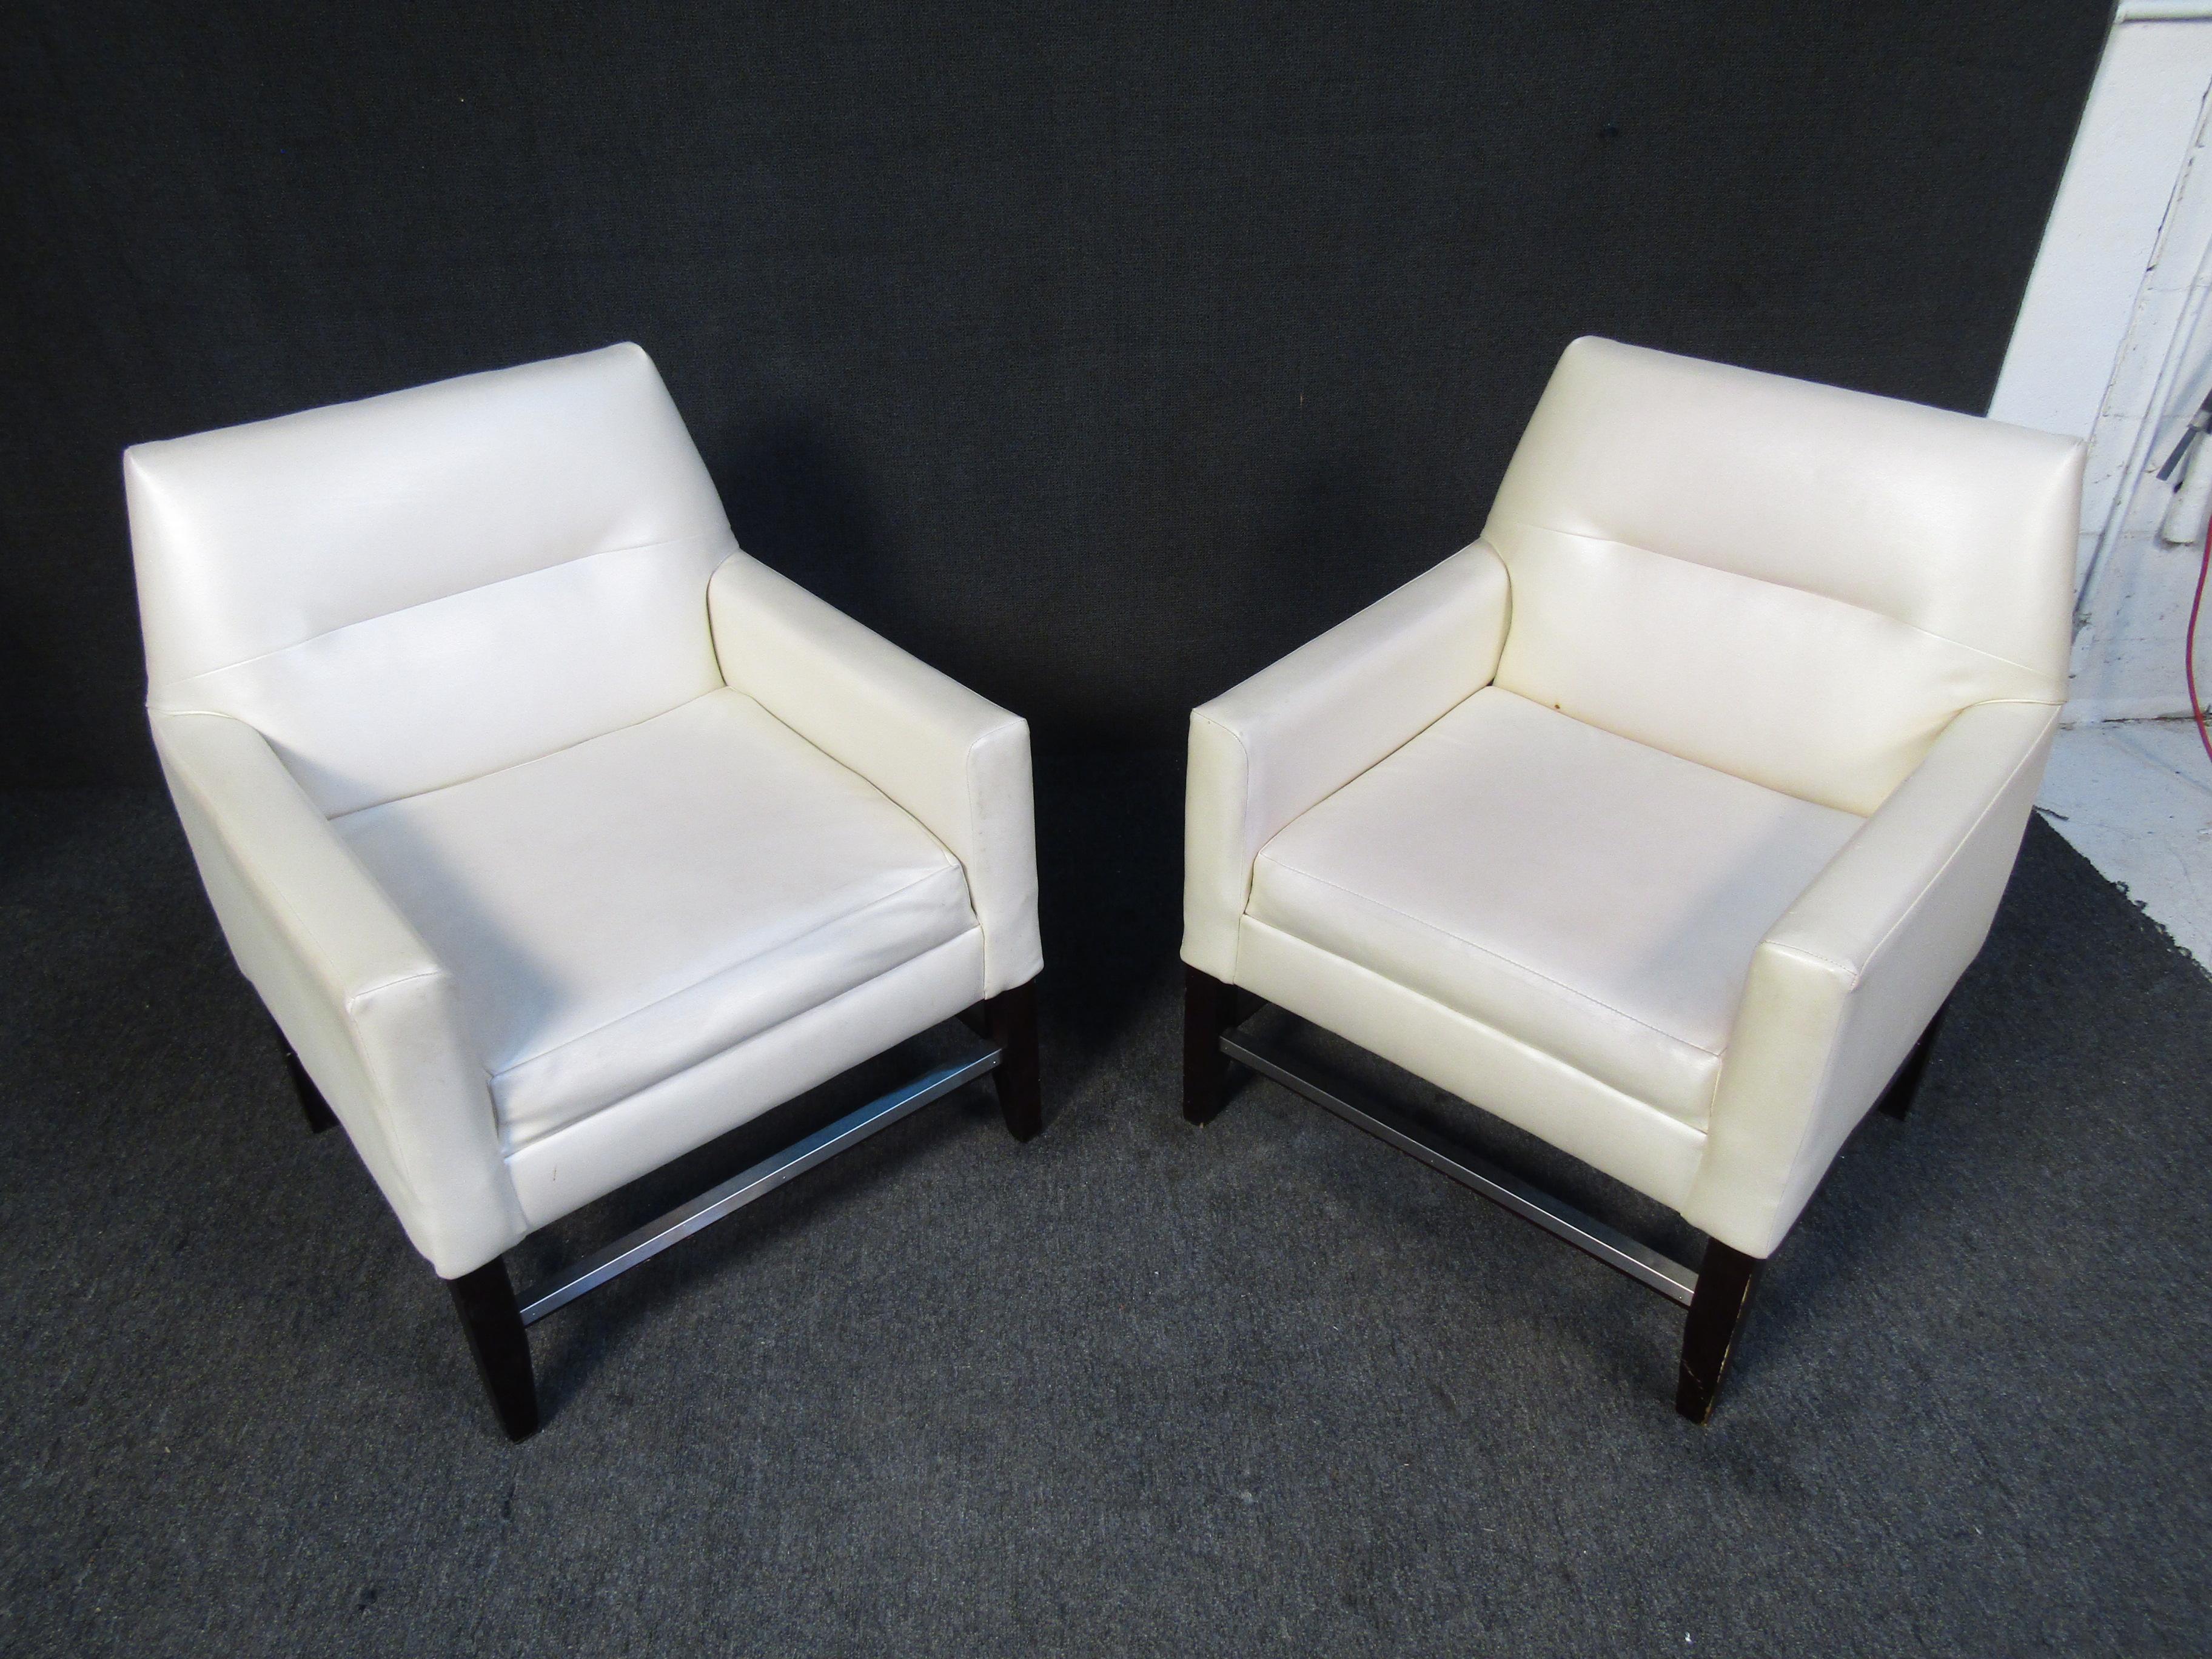 This sleek pair of white club chairs shows off Mid-Century style through a comfortable design. Vinyl upholstery makes these chairs easy to clean and maintain. Please confirm item location with seller (NY/NJ).